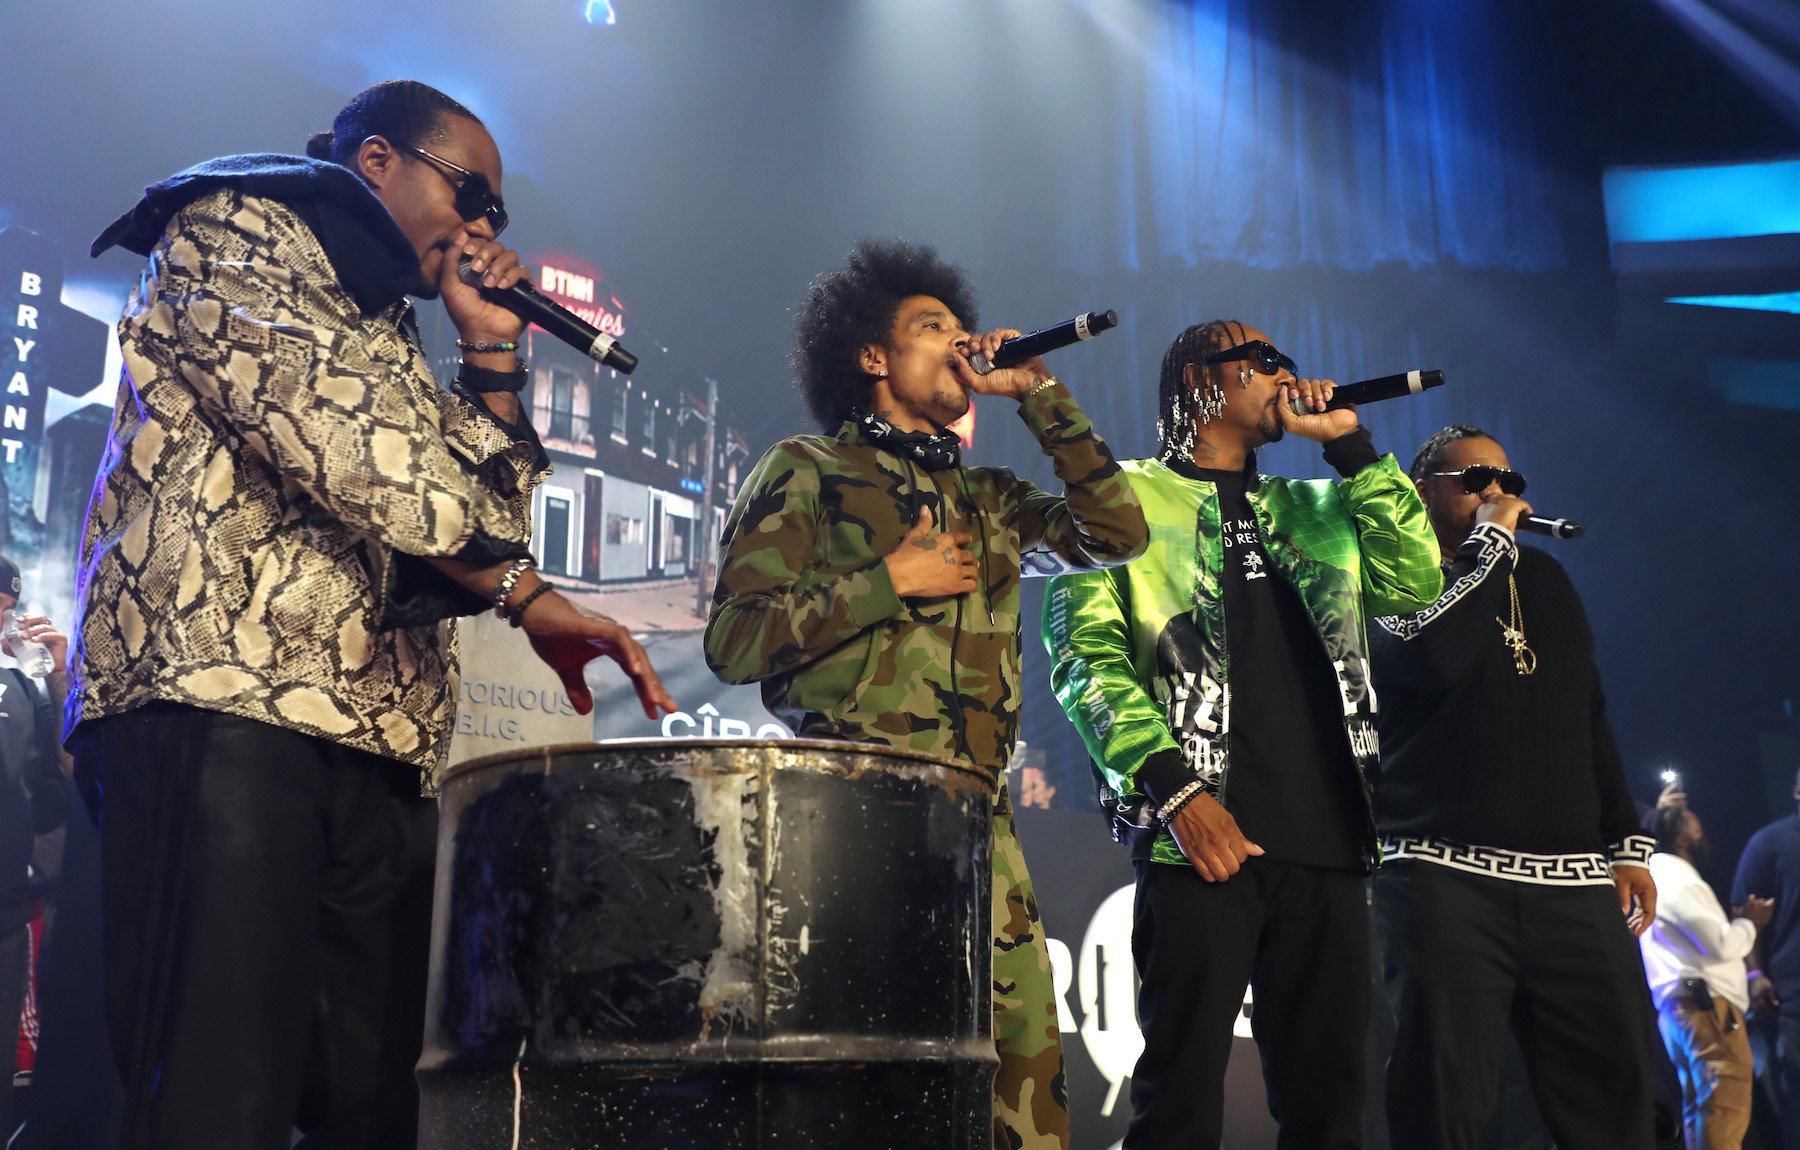 Bone Thugs-N-Harmony, who once collaborated with The Notorious B.I.G., performing together